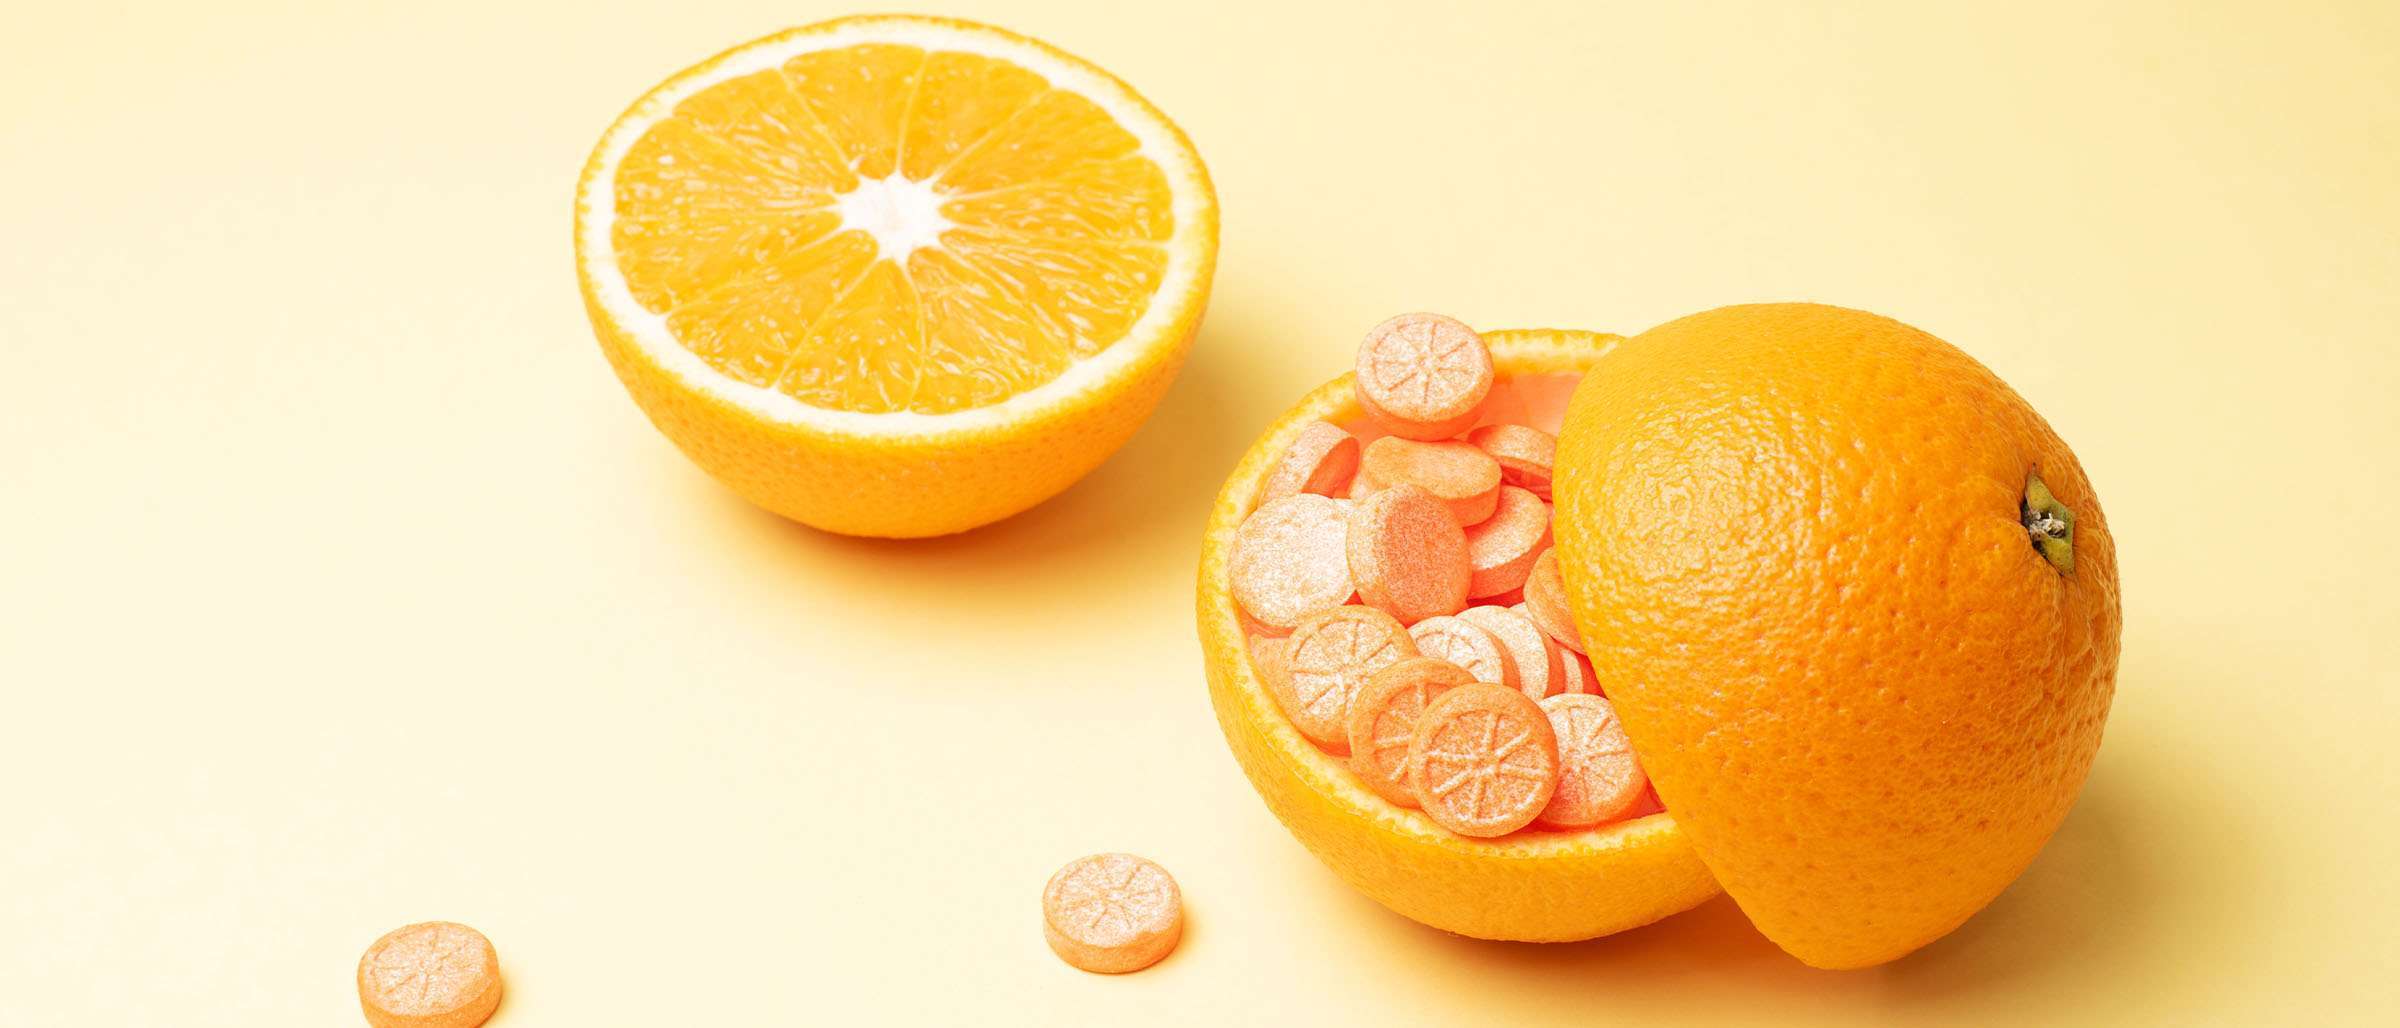 7 Reasons Why You Should Consider Vitamin C in Your Skin Care Routine